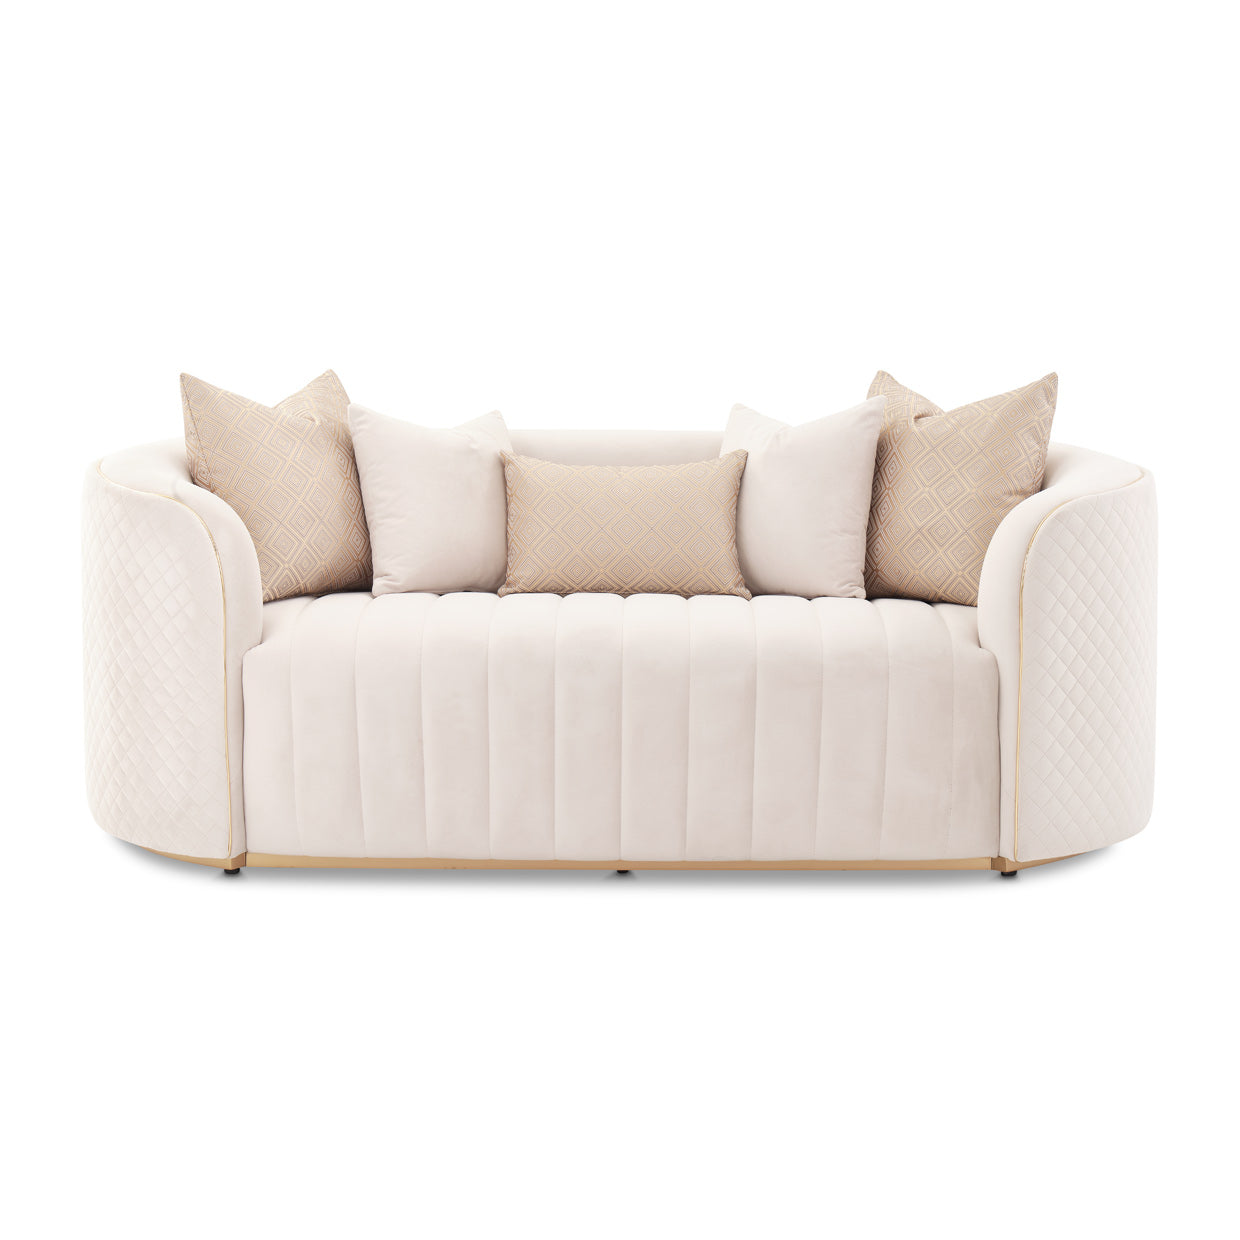 Ariana loveseat, Intimate luxury, Exquisite accent pillows, Gold jacquard, Velvety beige, plushness, Oblong centerpiece, Personal seating experience, Quiet evenings, Heartfelt, conversations, michael amini, Loveseat, Beige,  Gold, dream art 